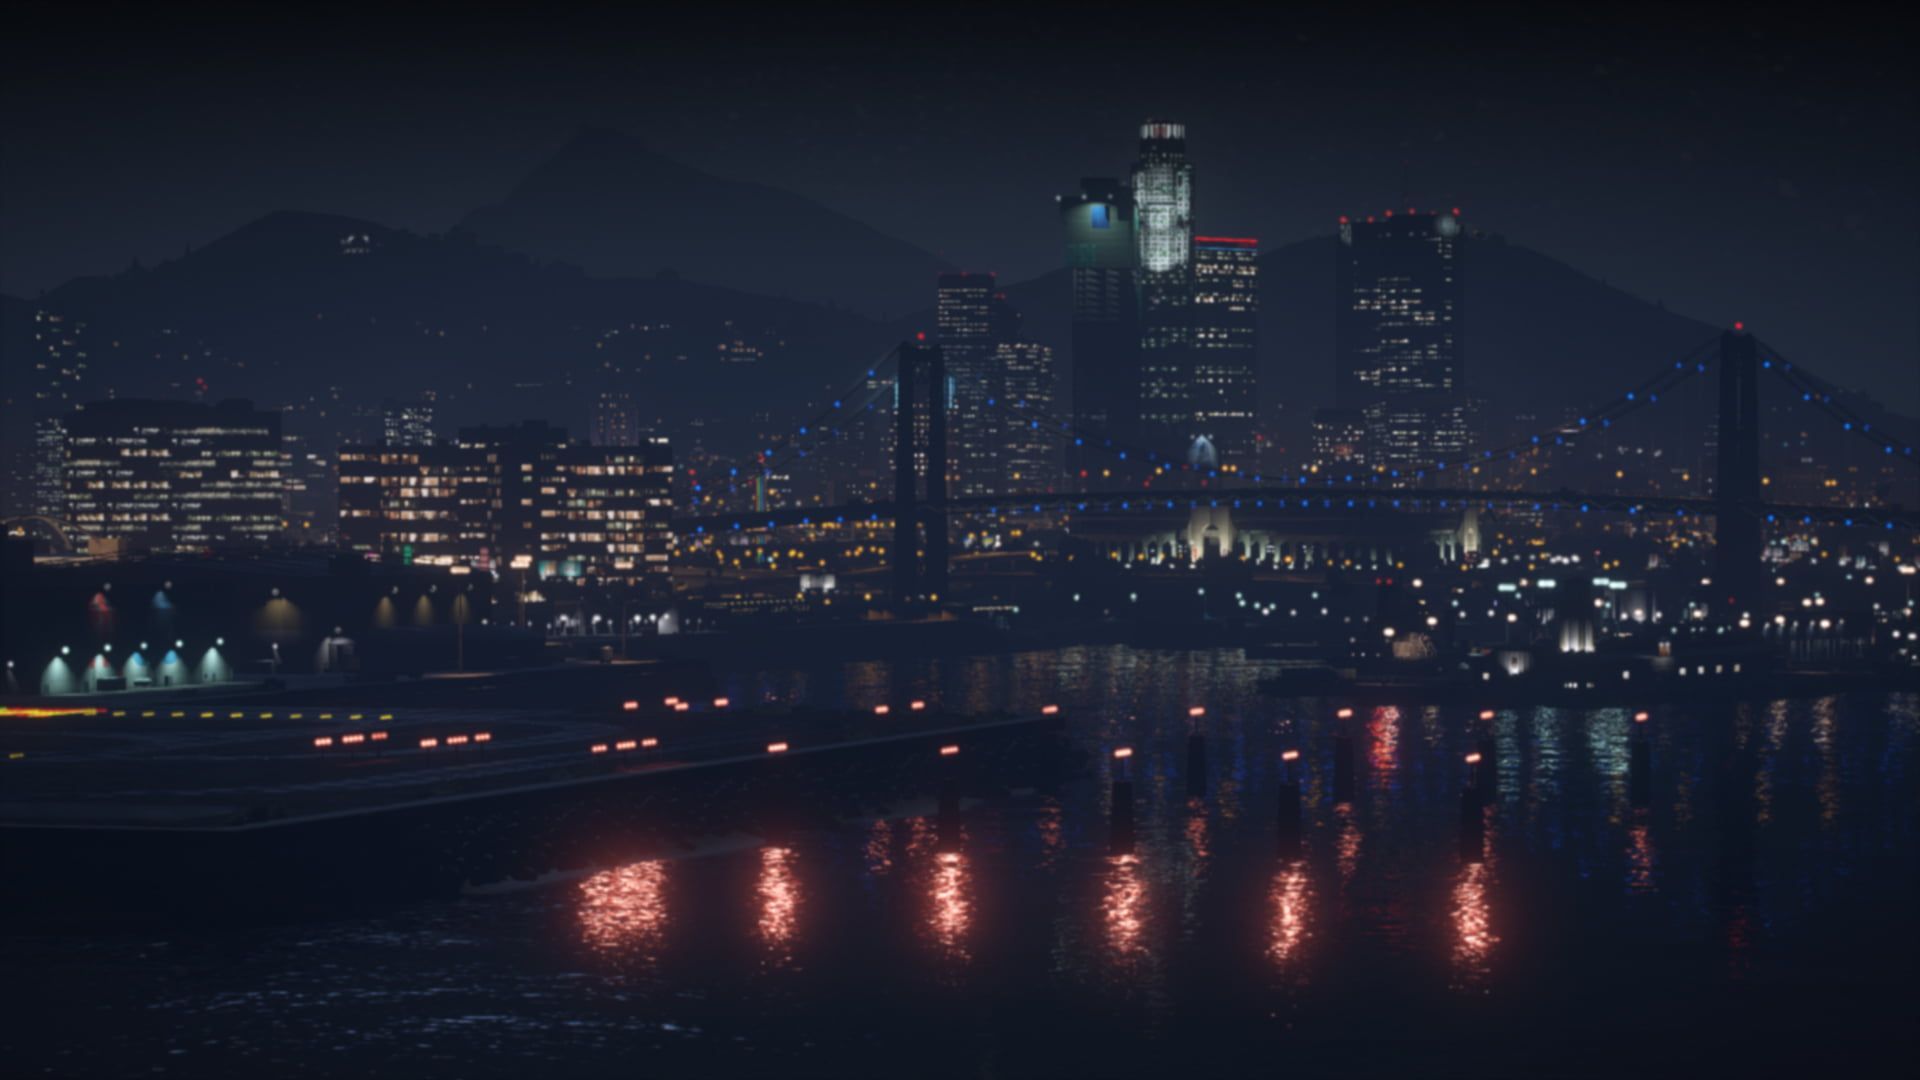 Core Roleplay Grand Theft Auto Grand Theft Auto V #Roleplaying #FiveM #city P #wallpaper #hdwallpaper. Grand theft auto, Grand theft auto games, HD wallpaper